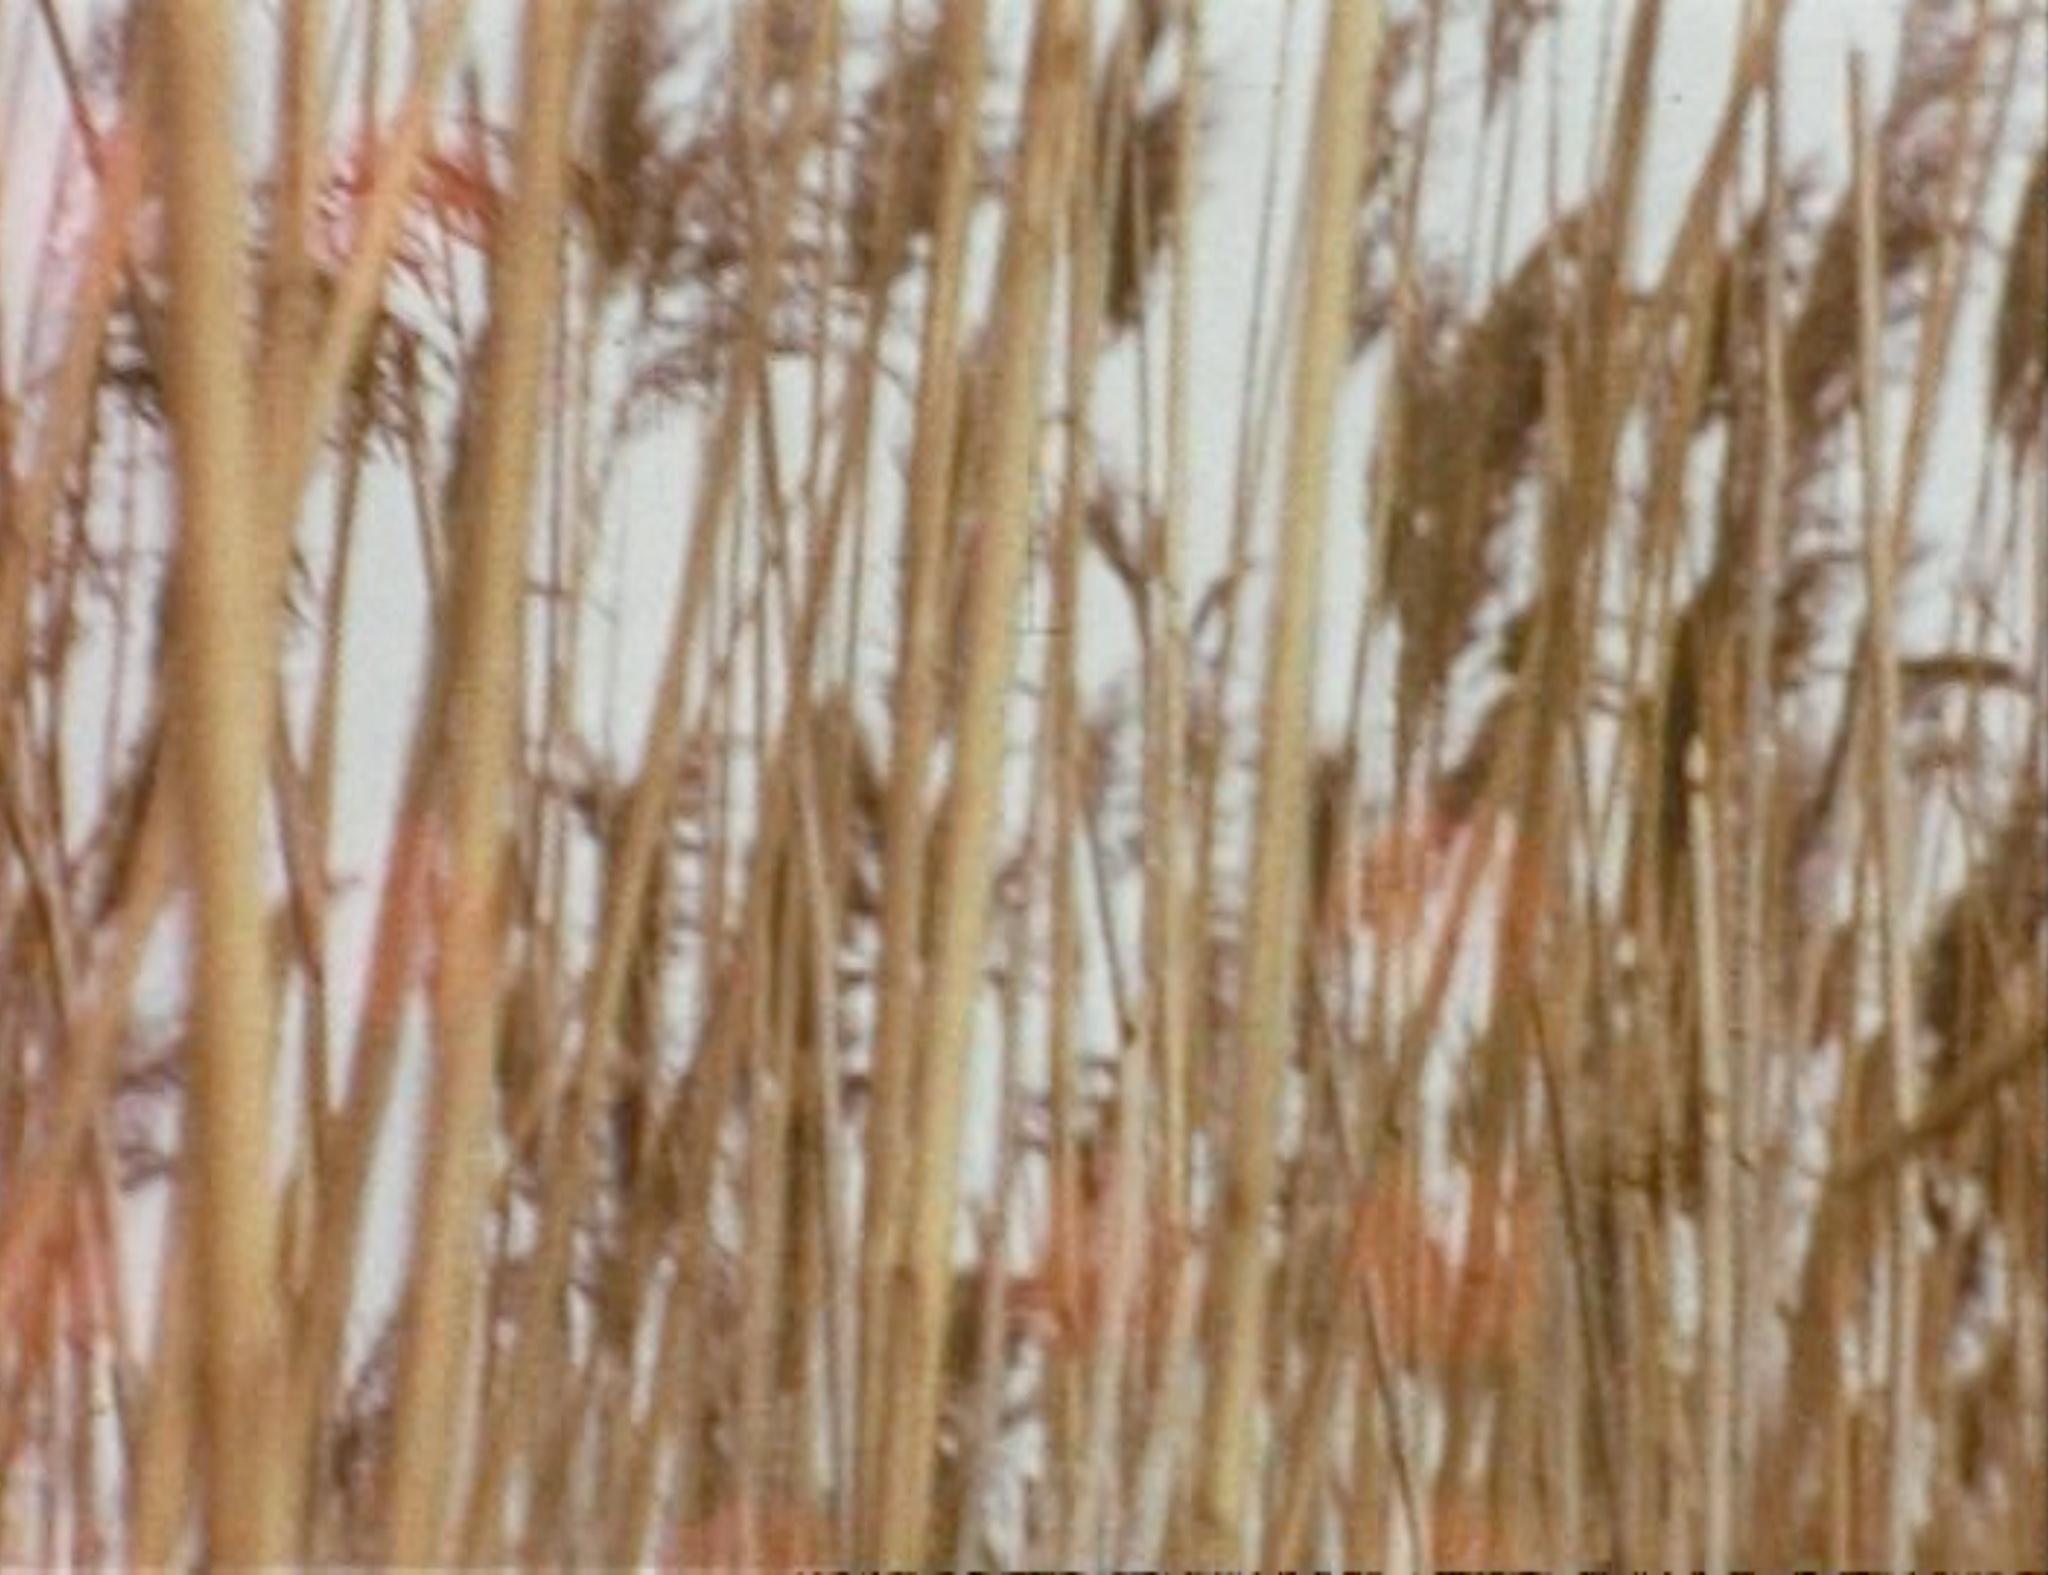 Chaotic image of many criss-crossing reeds and seed heads.